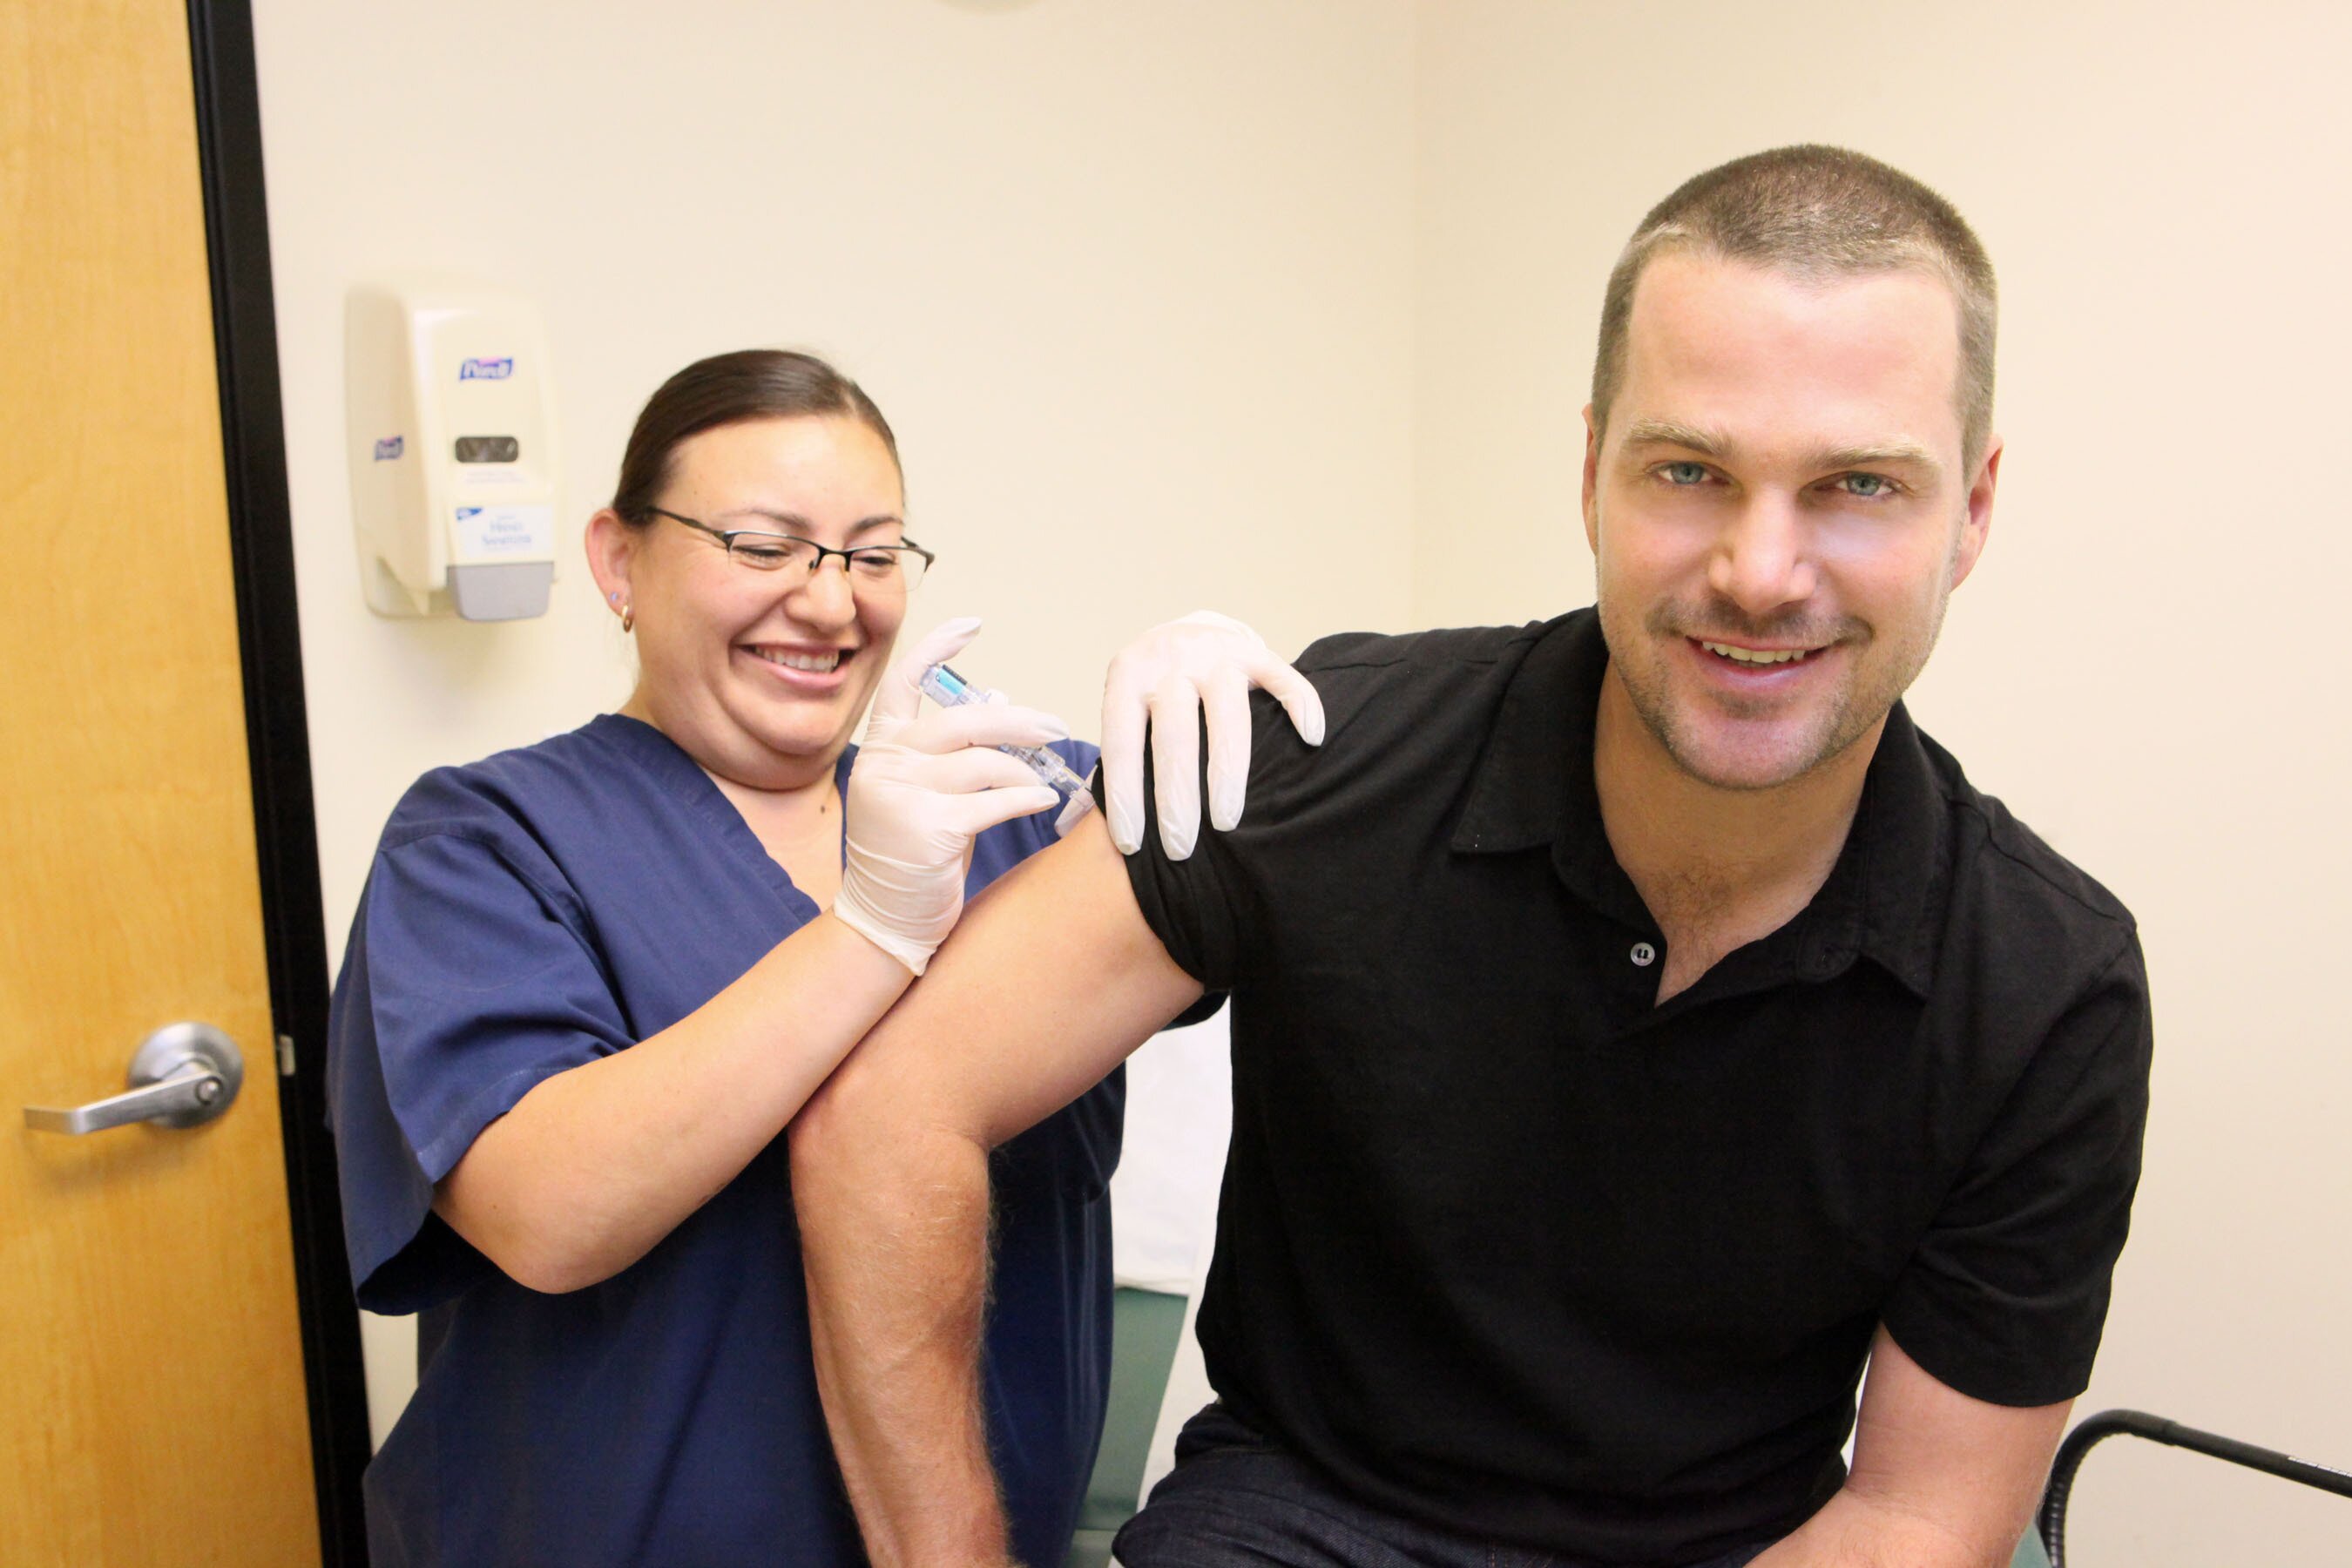 Actor Chris O'Donnell got a Fluzone(R) Intradermal vaccine, and he seems just fine. Picture of health. (PRNewsFoto/Sanofi Pasteur)